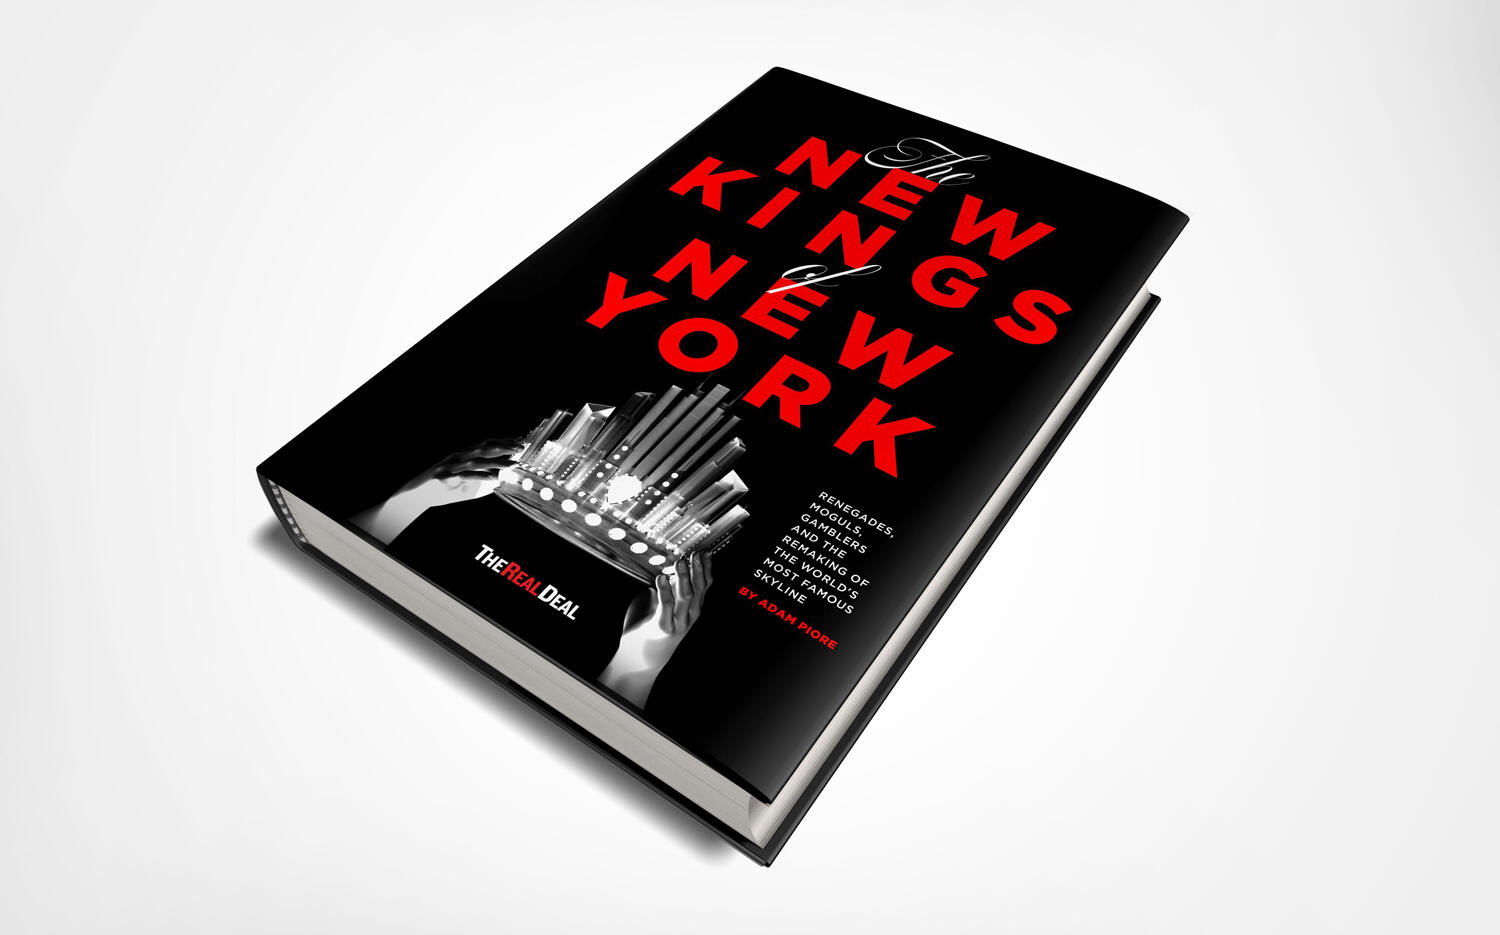 the new kings of new york book review